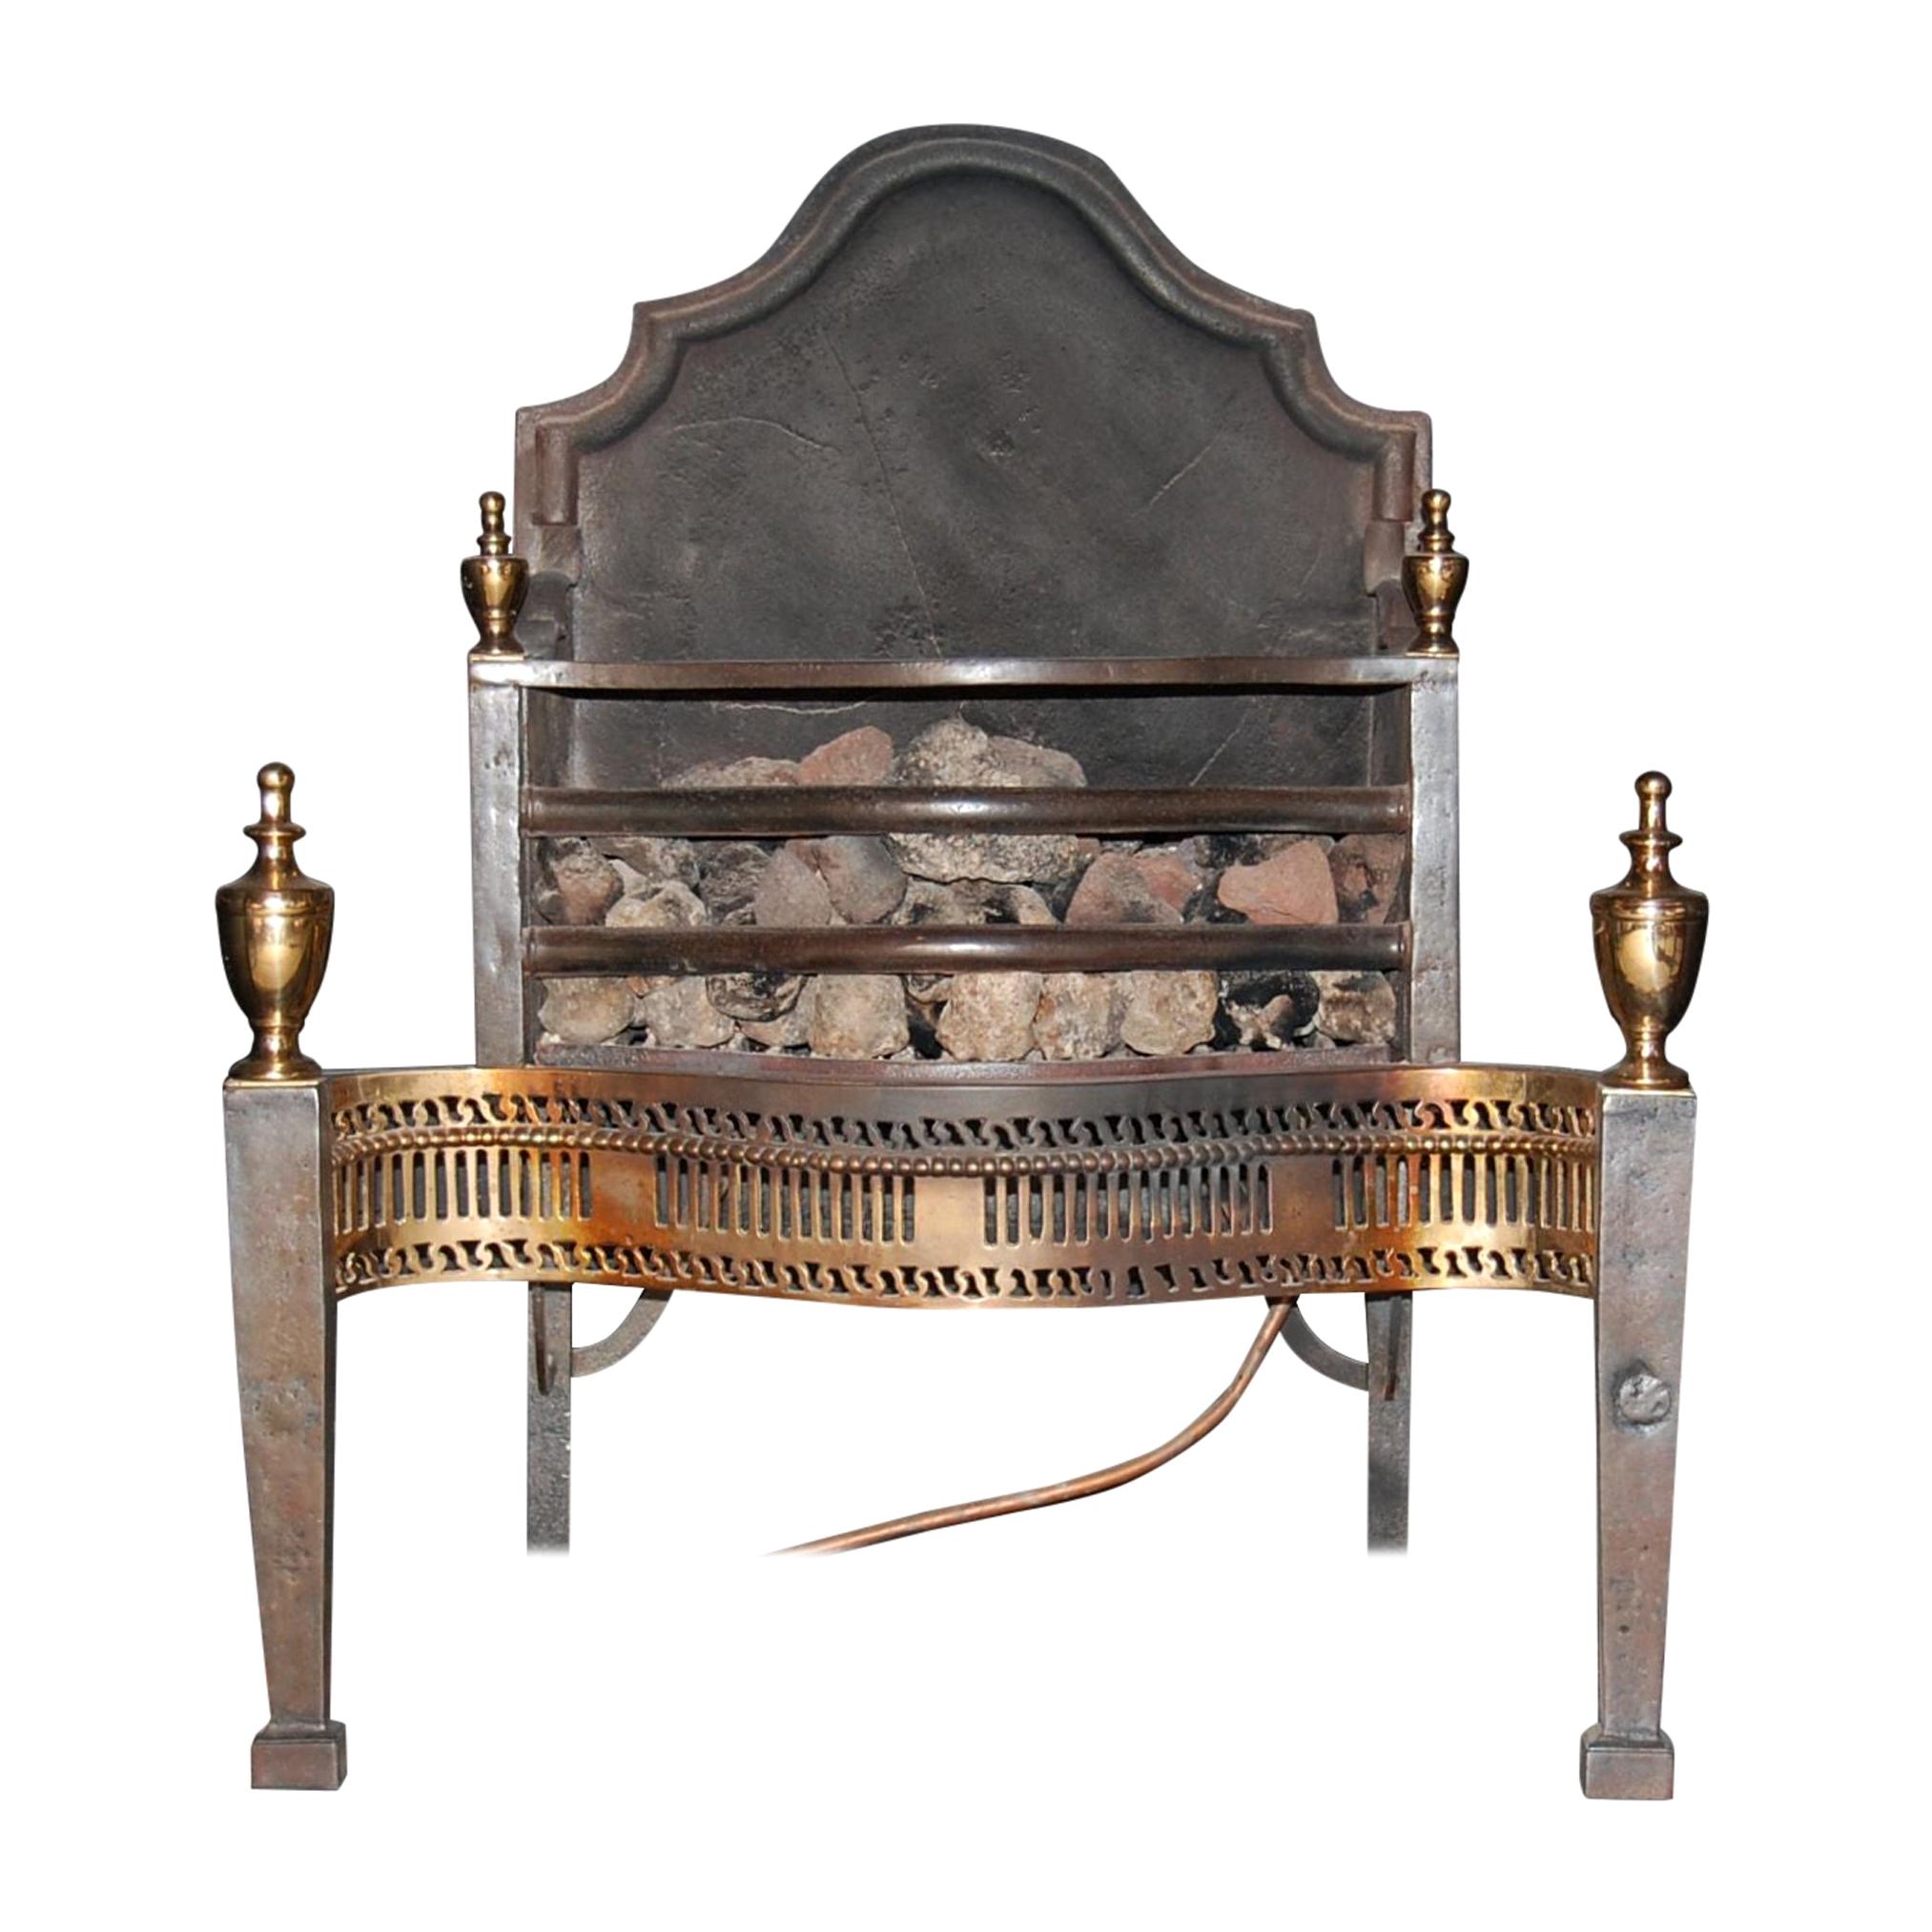 Mid-19th Century English Cast Iron, Steel and Brass Fireplace Insert For Sale